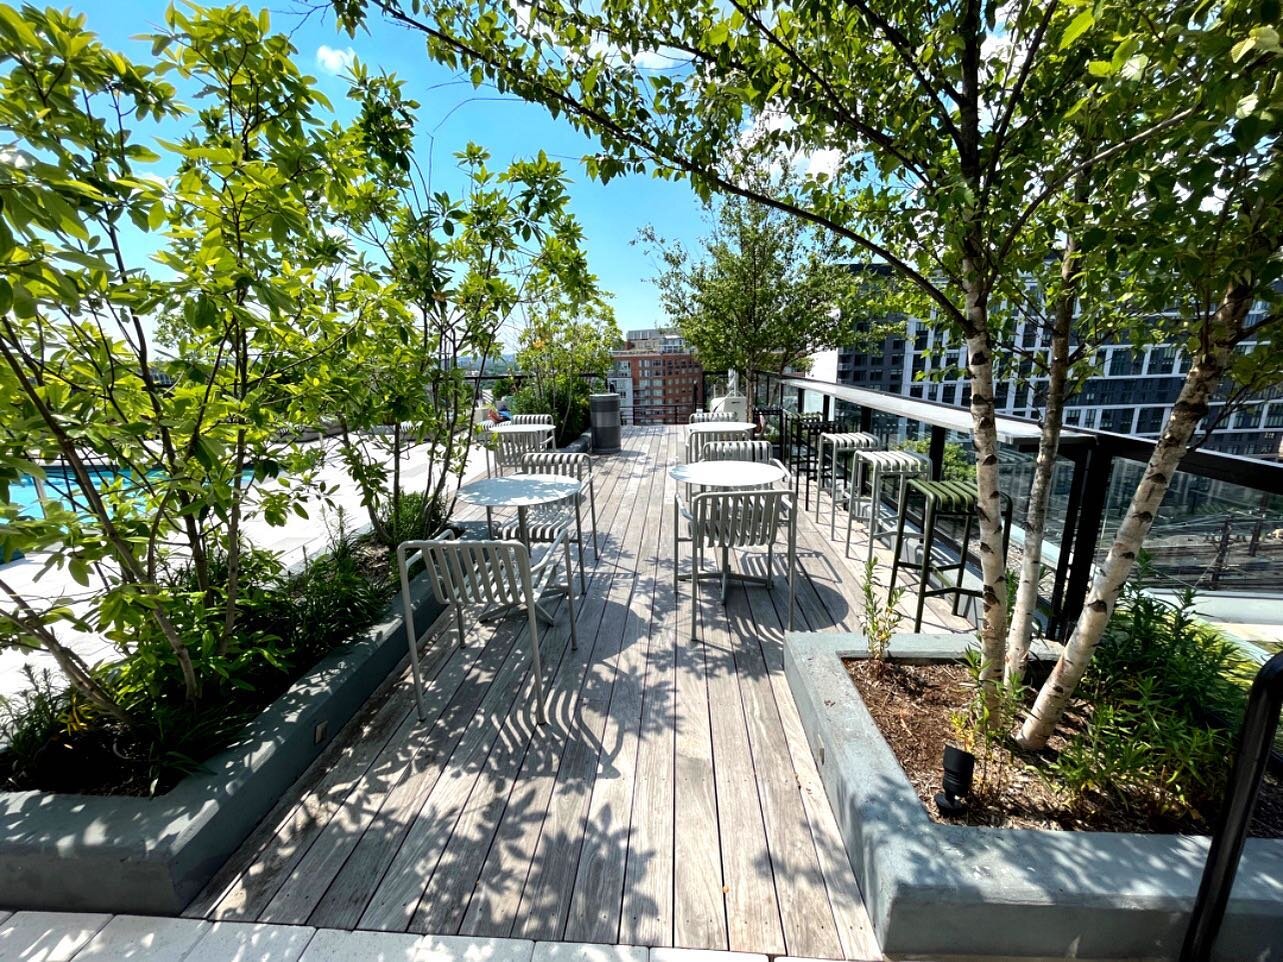 Nothing better than a cool shady spot with a nice view 🤩

#dc #dcamenity #dcapartments #greenroof #greenspace #dcviews #ecoroof #dcgreenroof #egr #elevateyourroof #unionmarket